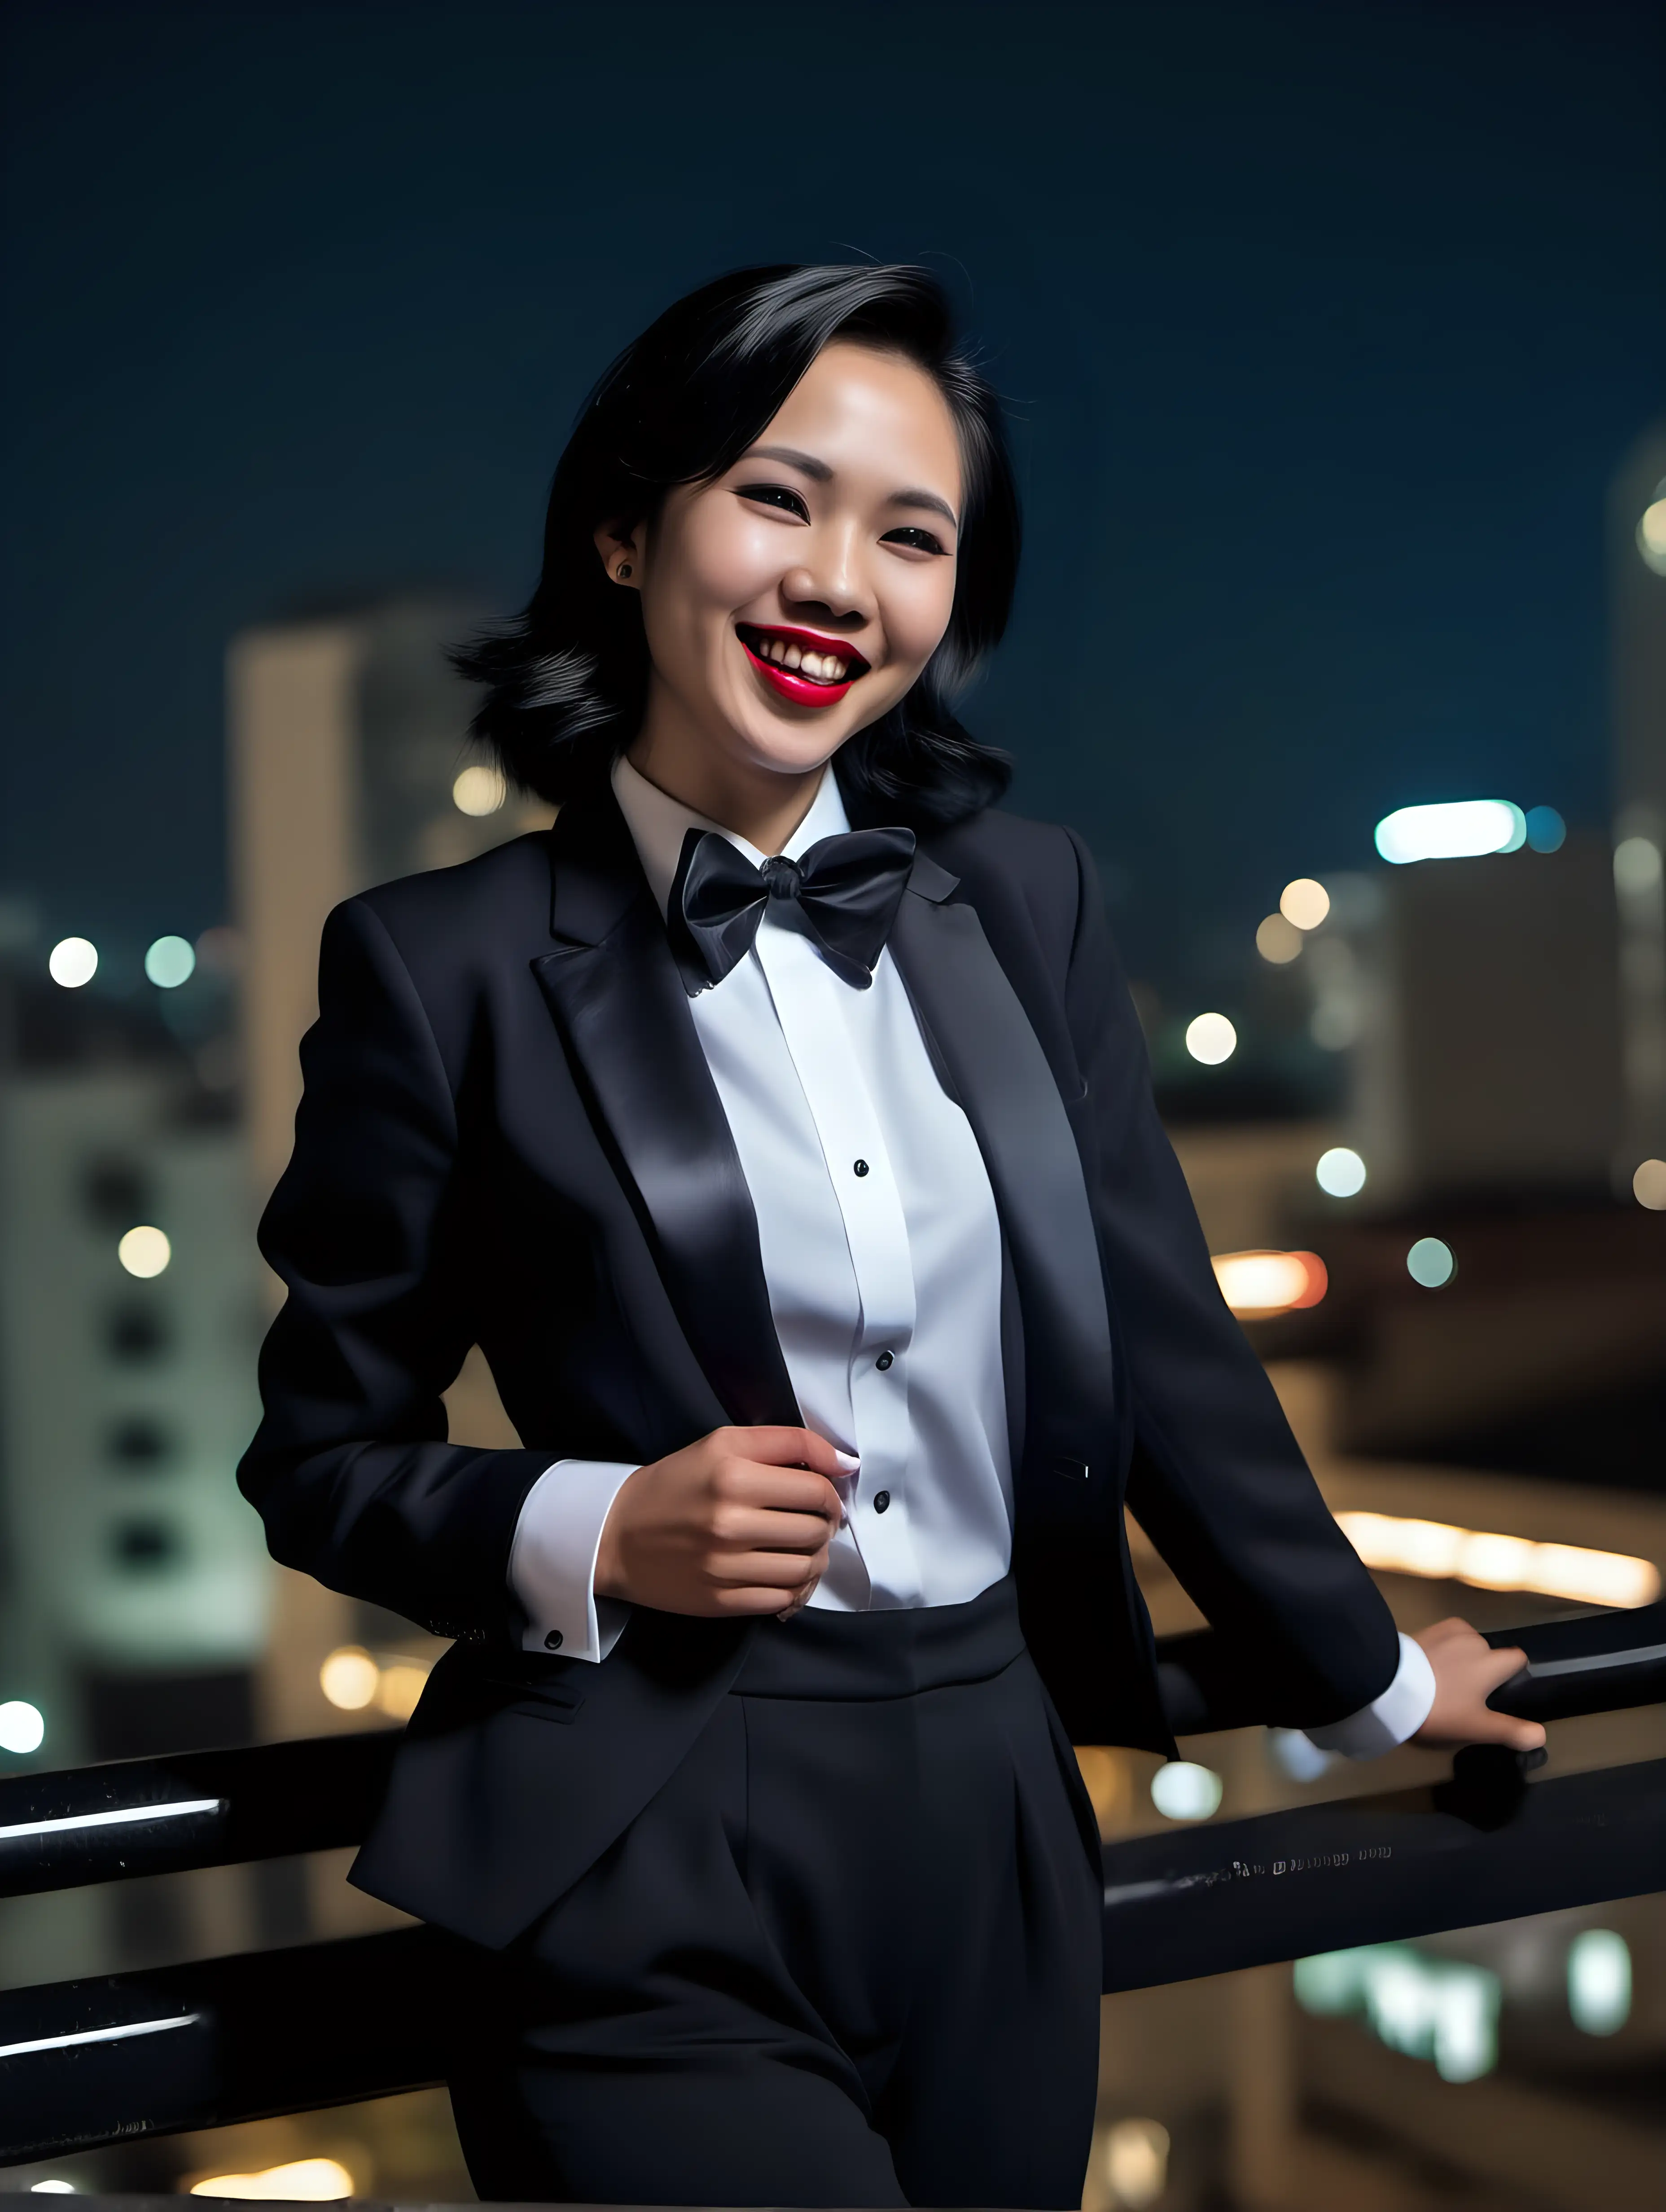 30 year old smiling and laughing vietnamese woman with shoulder length black hair and lipstick wearing a tuxedo with a black bow tie. (Her shirt cuffs have cufflinks). Her jacket has a corsage. She is standing on top of a building at night.  She is facing forward.  Her hands are in her pants pockets.